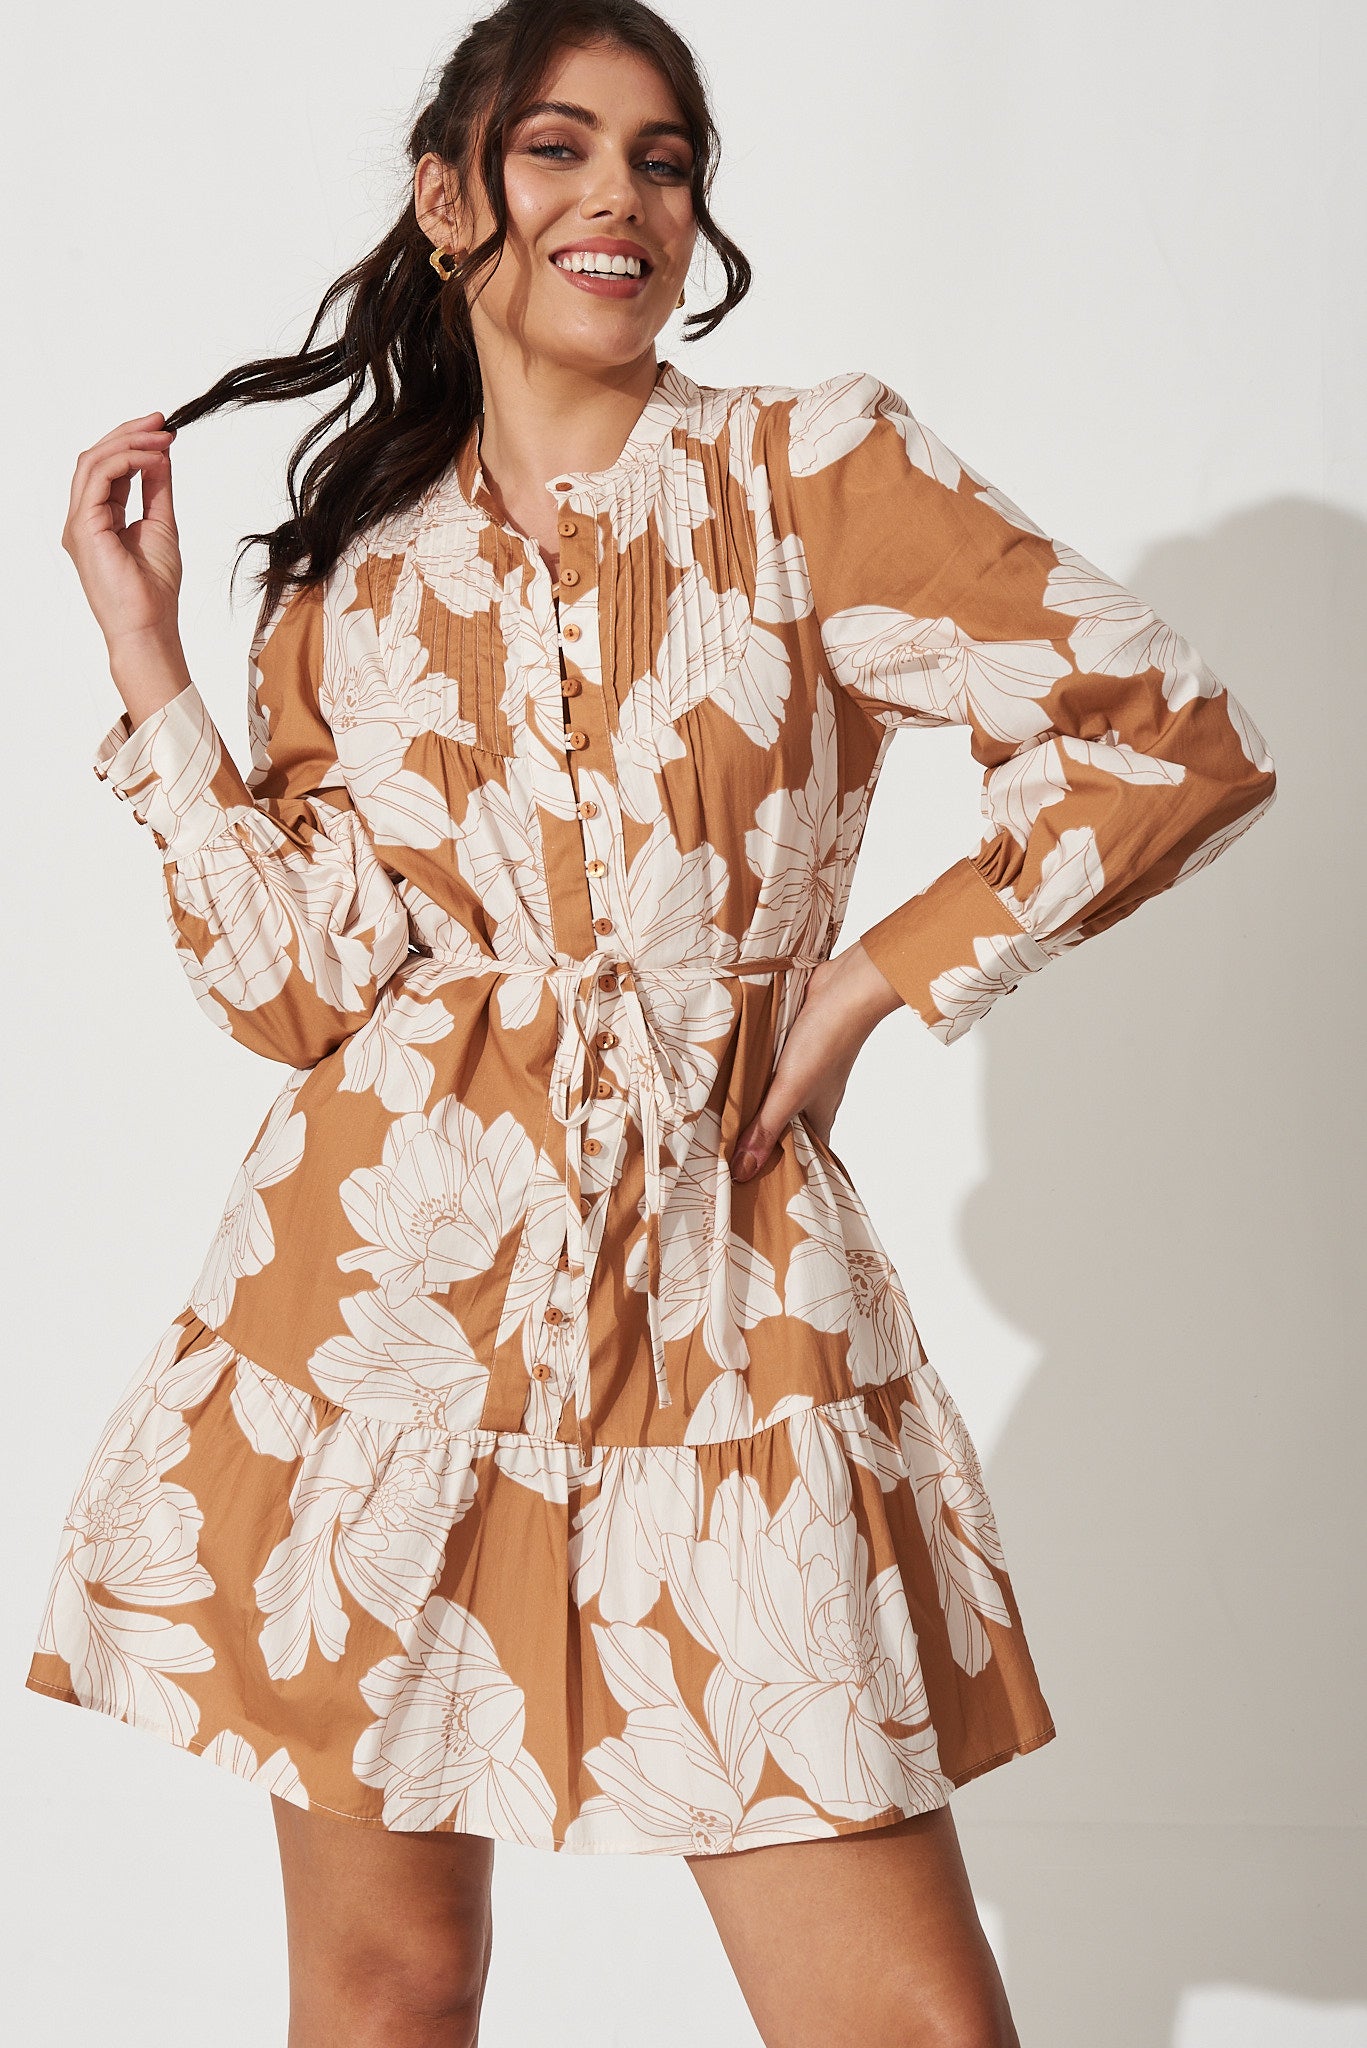 Gal Dress In Tan With White Floral Print Cotton - front